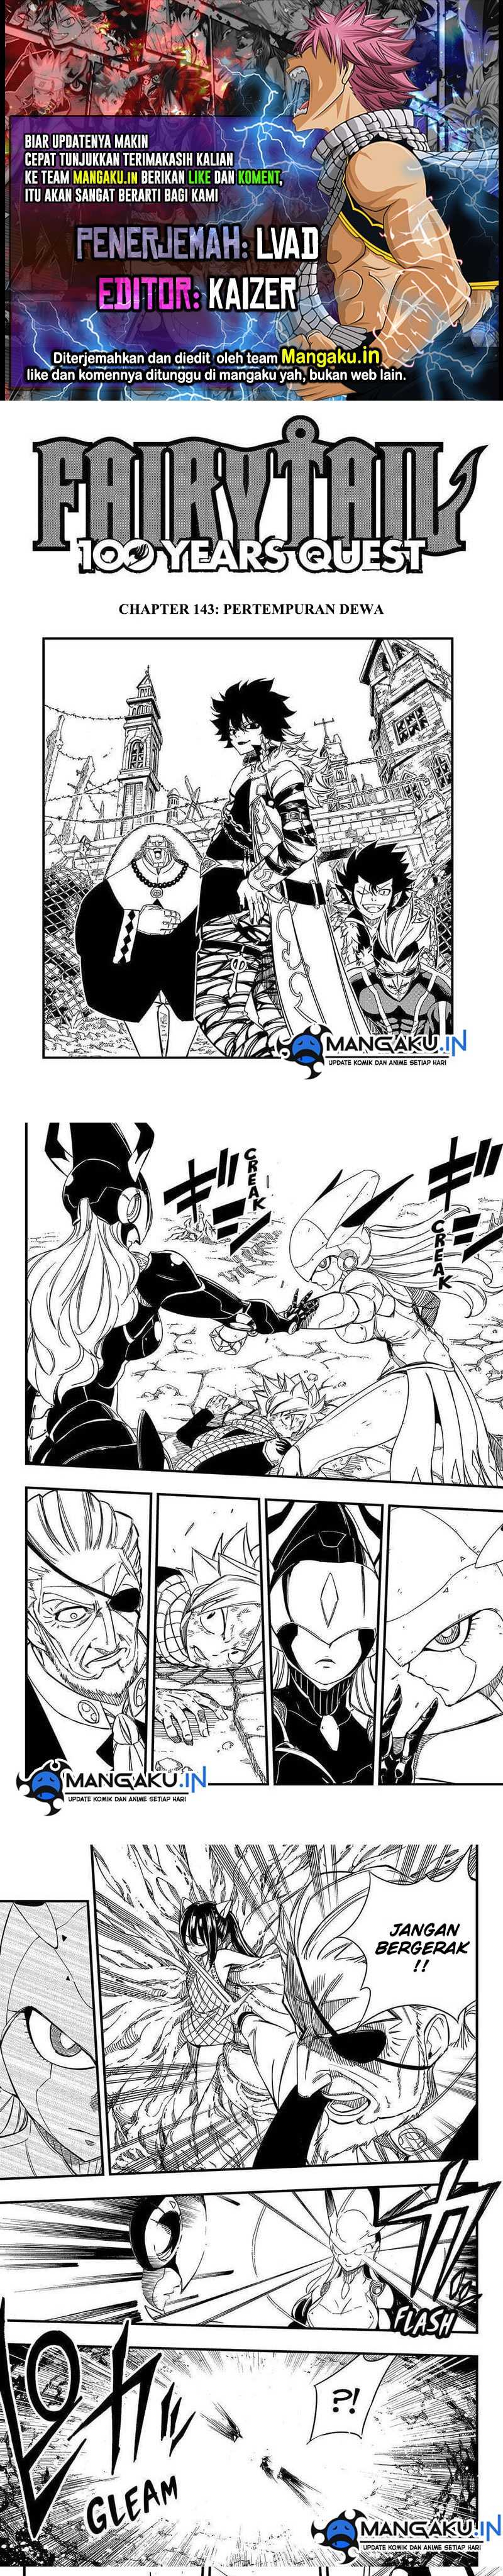 Fairy Tail: 100 Years Quest Chapter 143